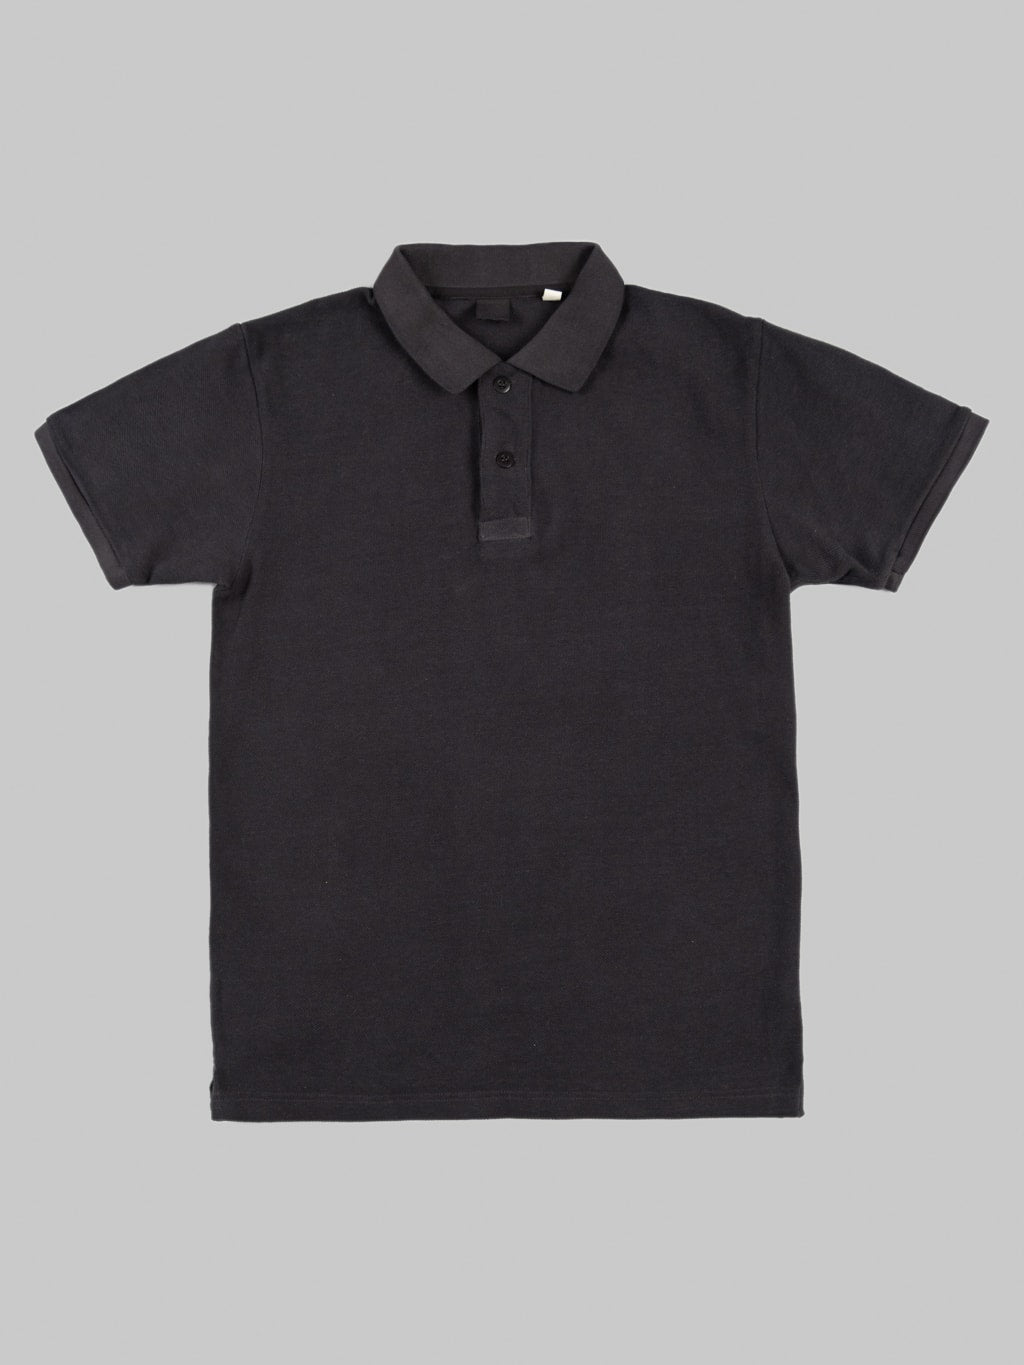 ues polo shirt black front